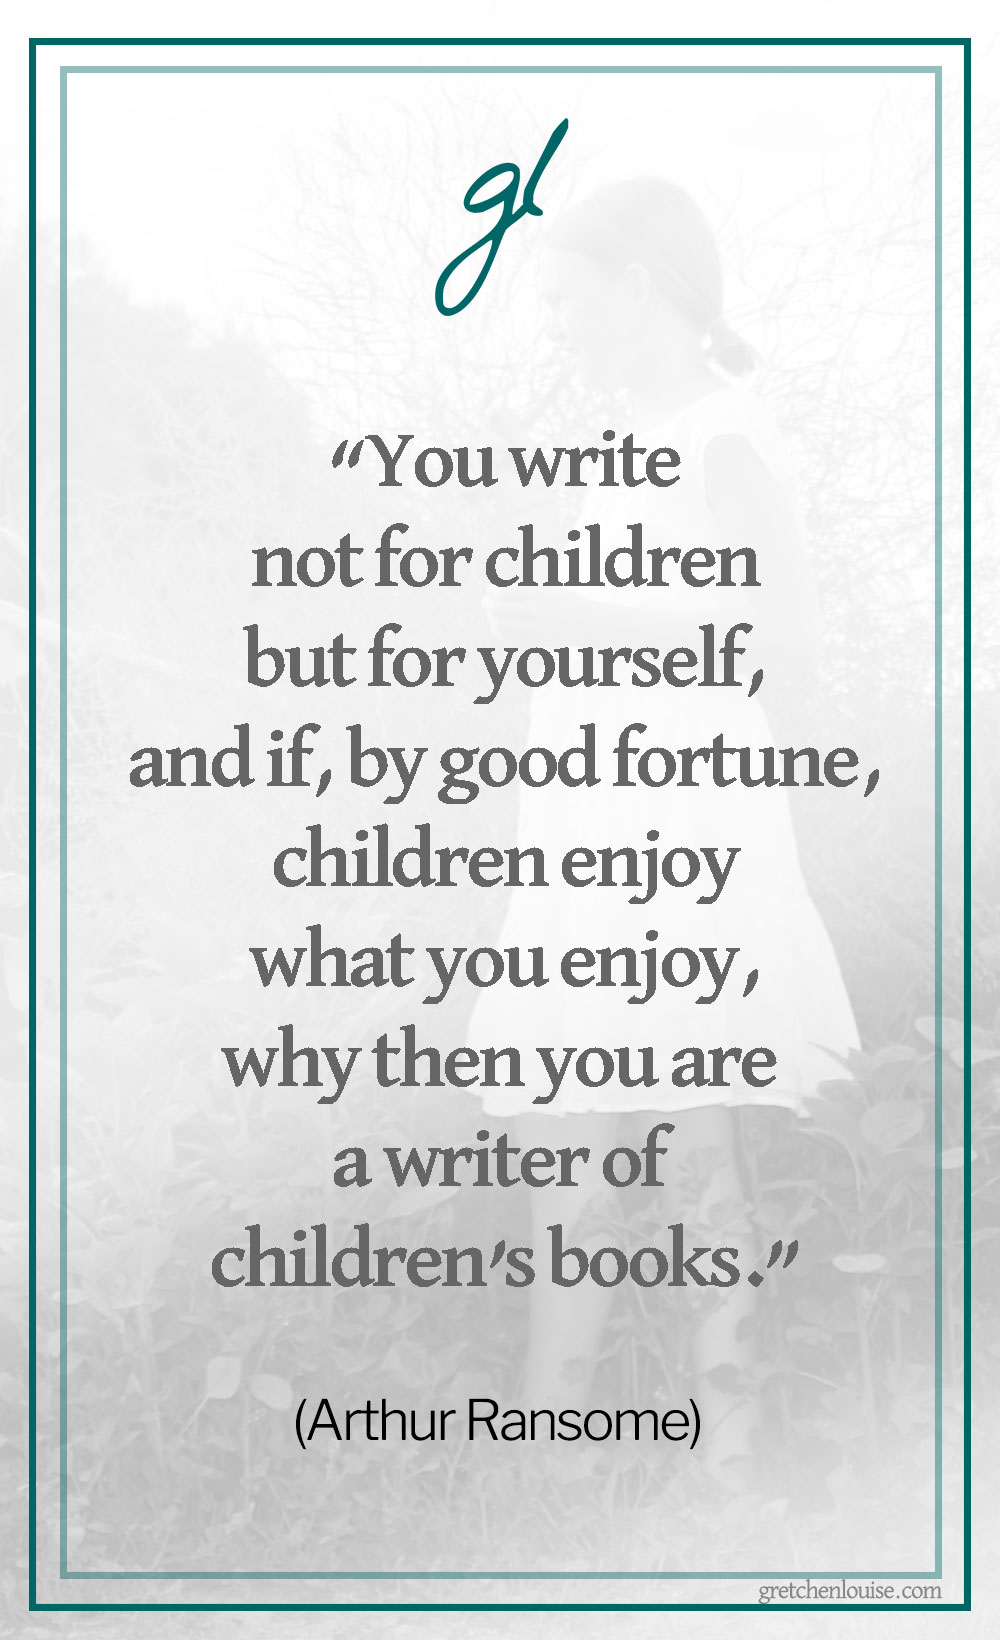 “You write not for children but for yourself, and if, by good fortune, children enjoy what you enjoy, why then you are a writer of children’s books... No special credit to you, but simply thumping good luck.” (Arthur Ransome in a 1937 letter to H.J.B. Woodfield, editor of The Junior Bookshelf, as quoted in Peter Hunt’s Understanding Children’s Literature)